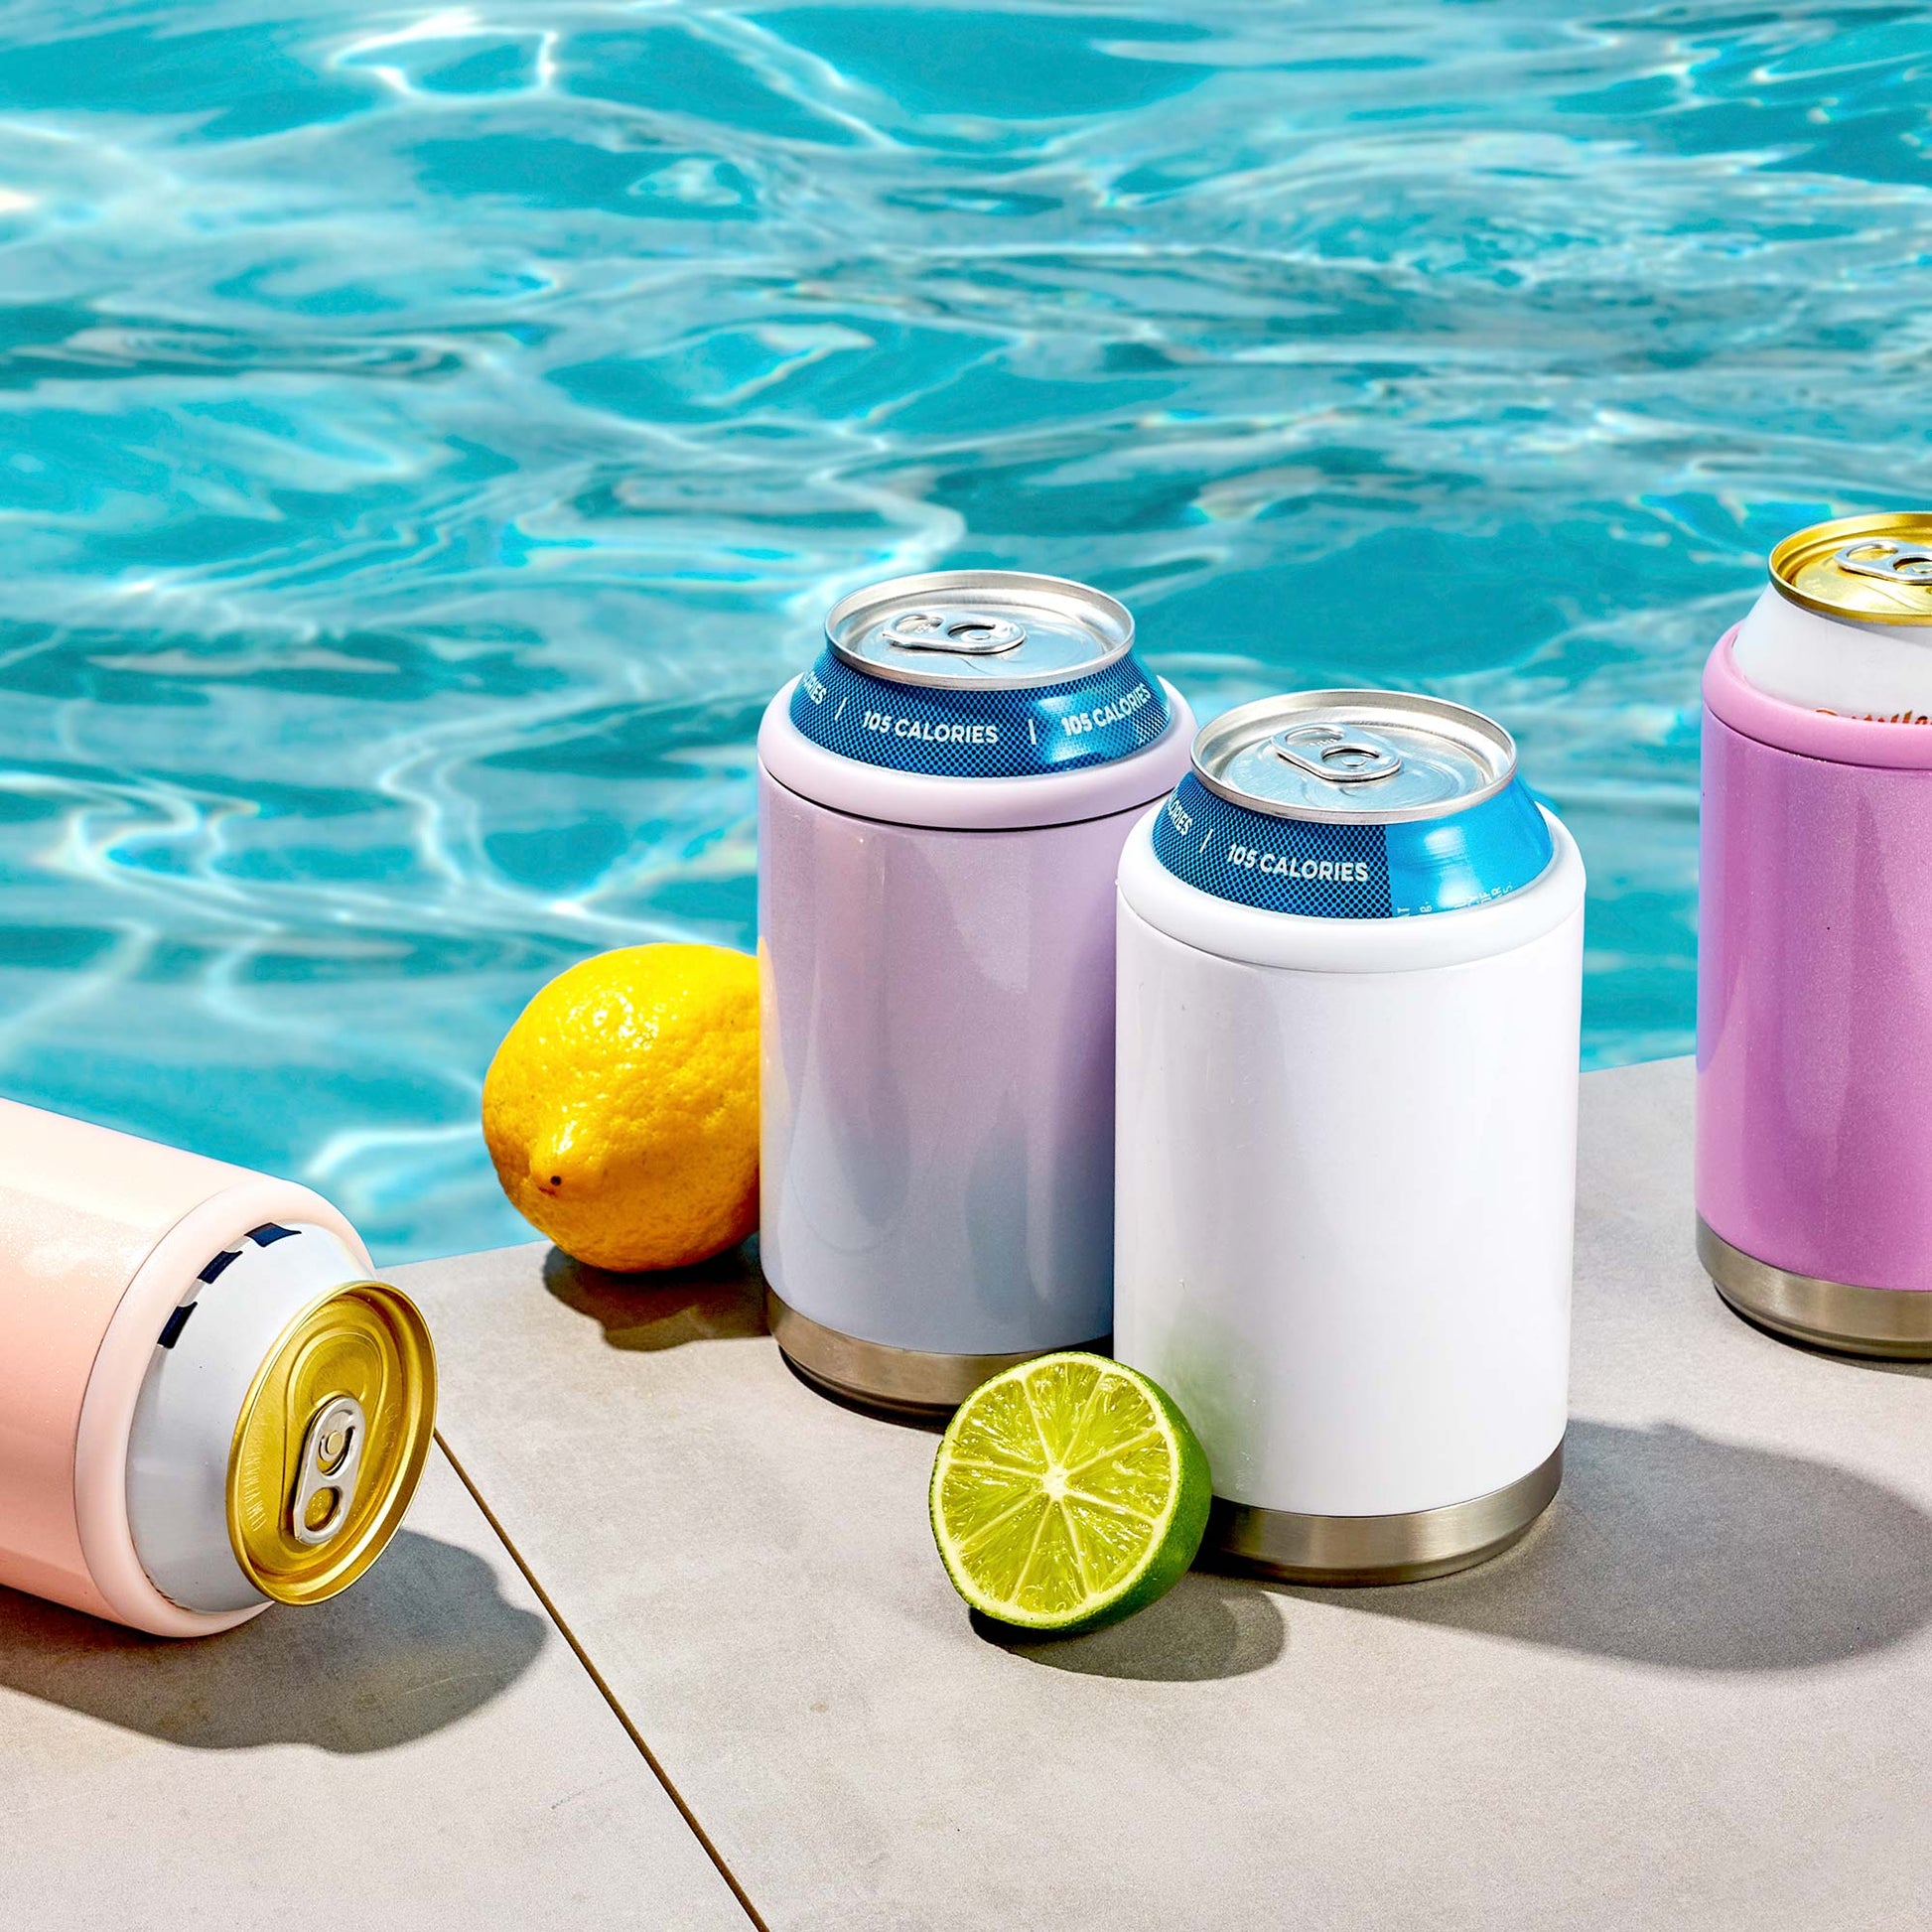 Maars skinny can coolers are on sale at